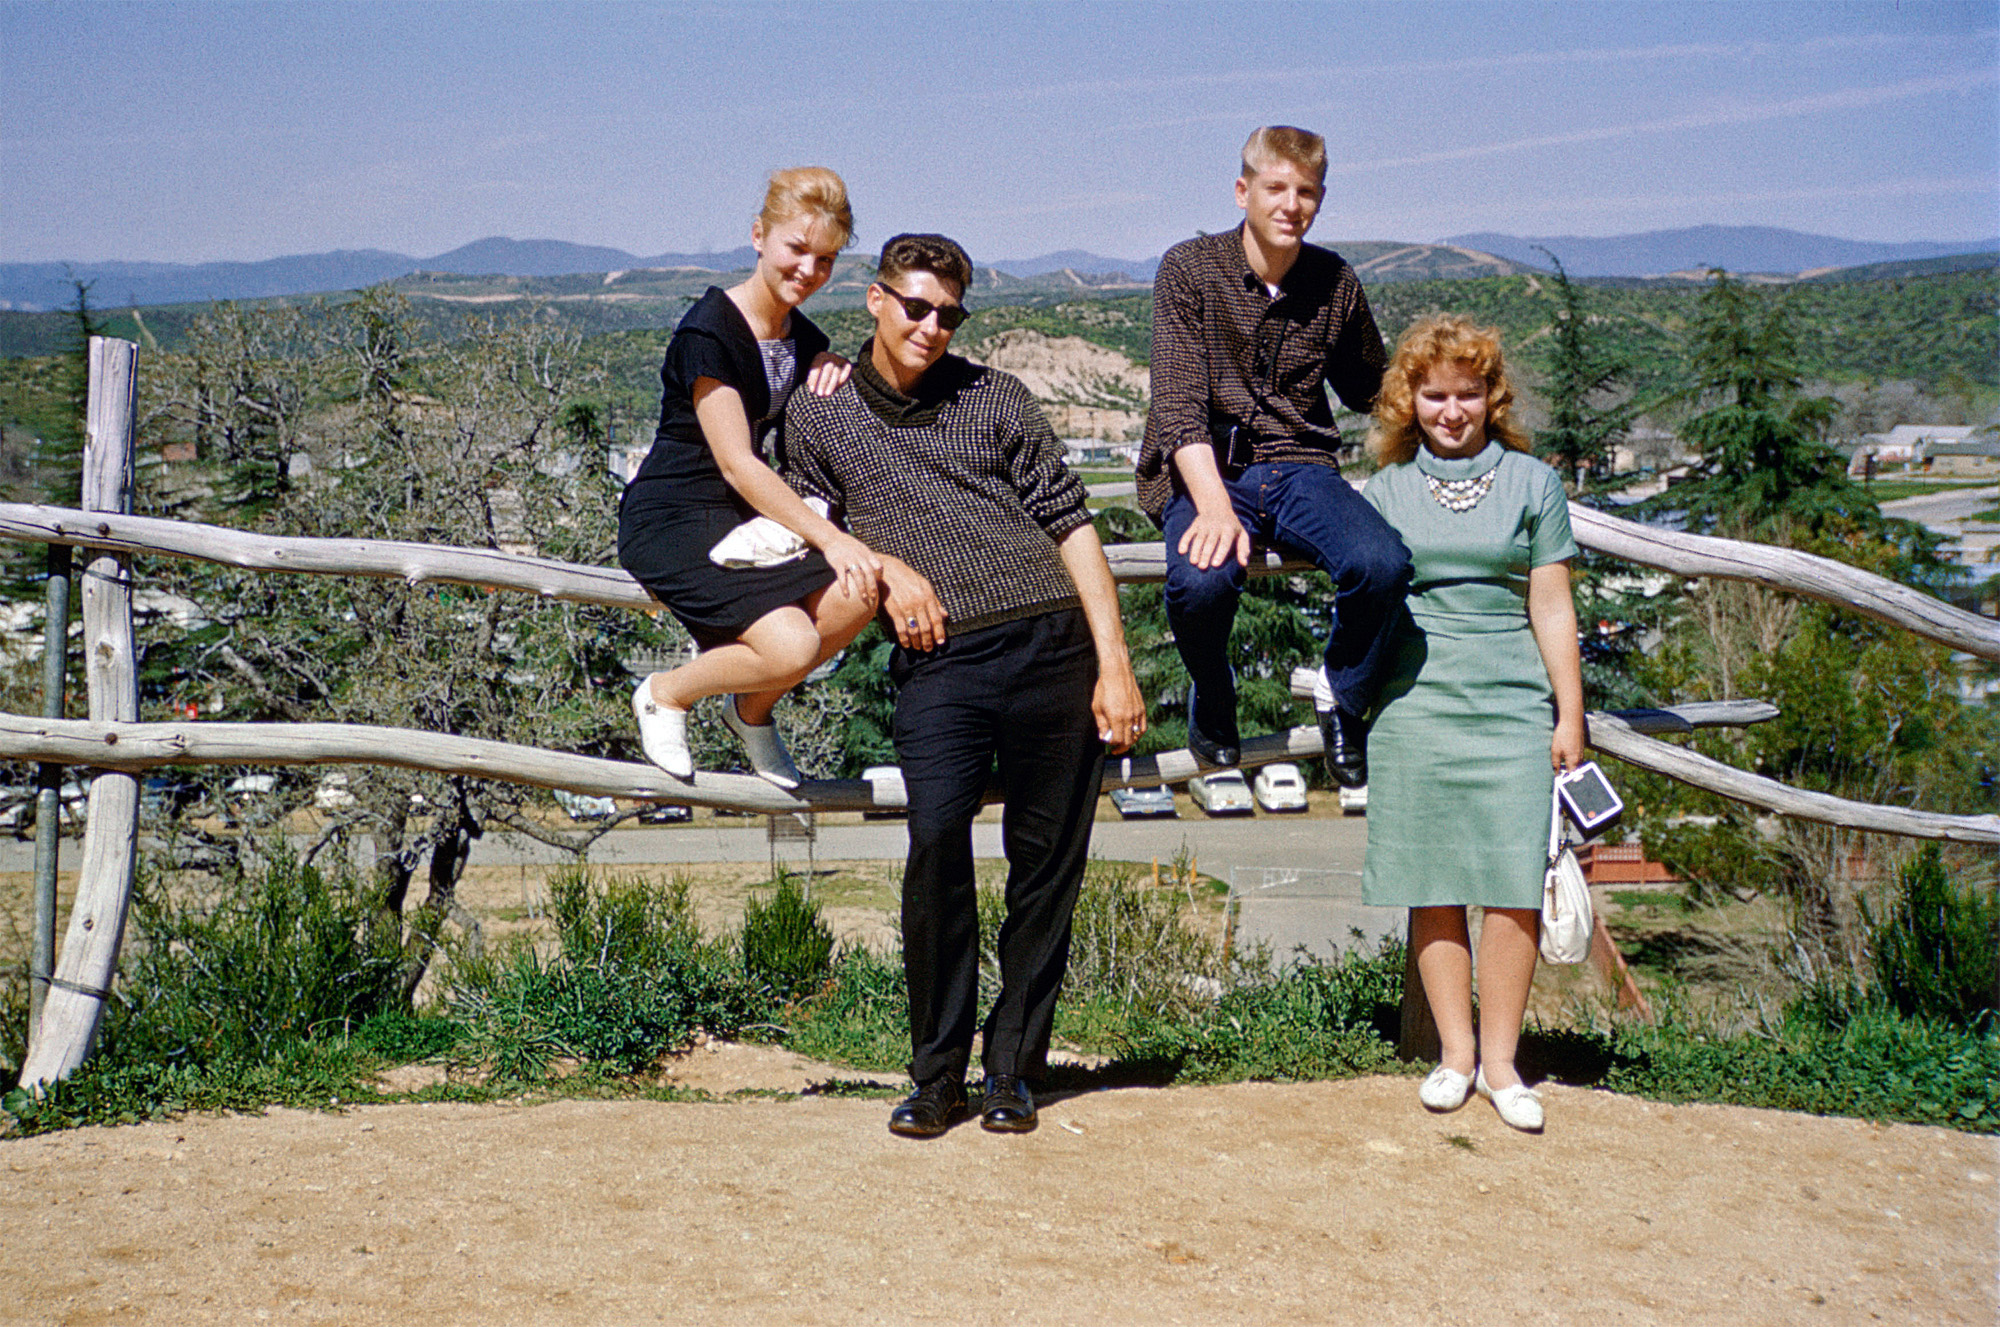 My sister-in-law, left, previously seen here with her Chevrolet Bel Air, in 1961 with her brother and friends in the foothills of the San Fernando Valley in Southern California. 35mm Kodachrome slide. View full size.

This was taken at the William Hart Ranch, now the William S. Hart Park and Museum, in Newhall, CA –- Deborah